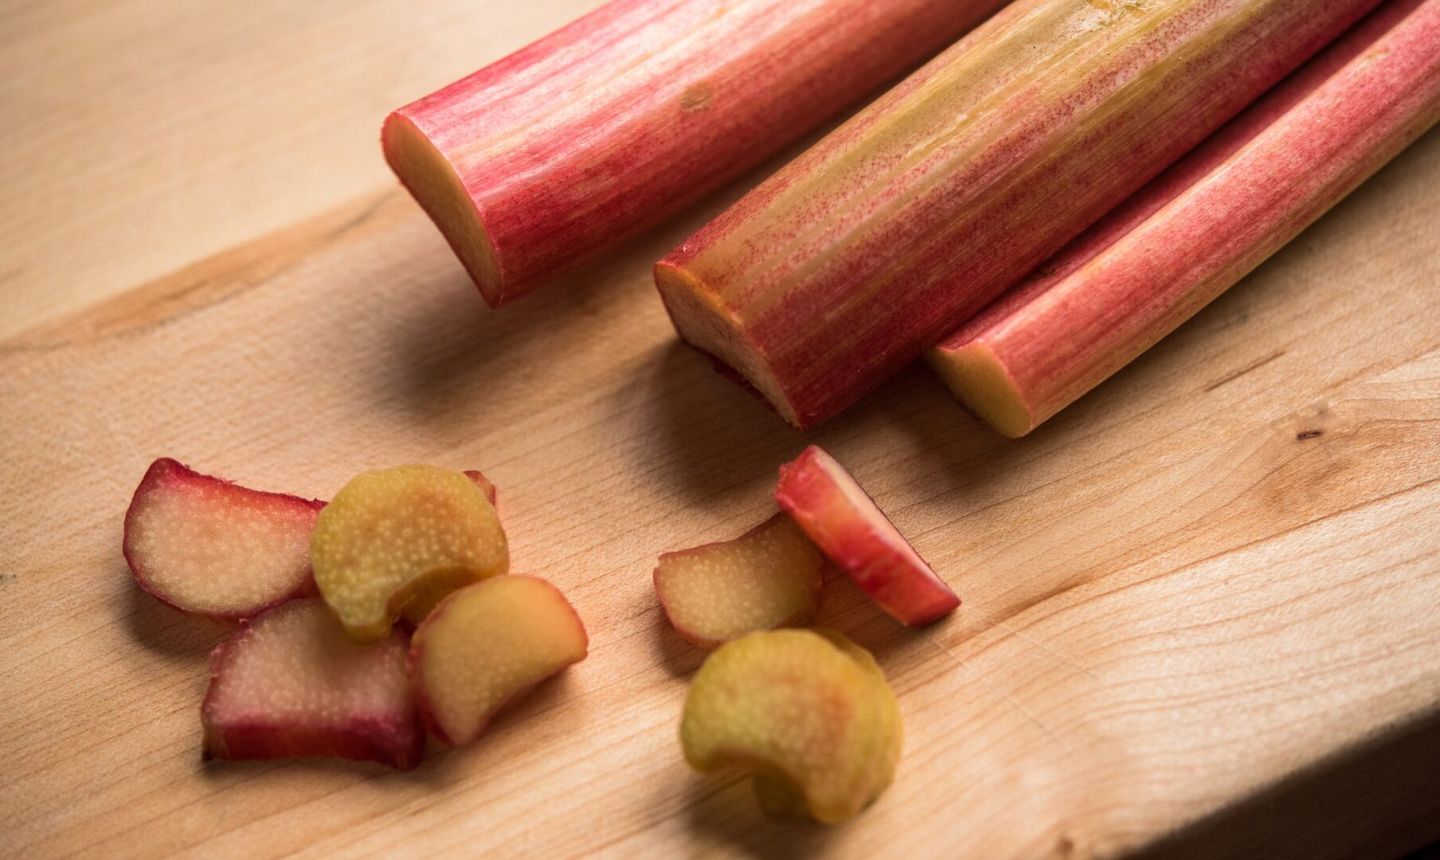 Things To Do With Rhubarb: 10 Creative Ideas (No Pie!)